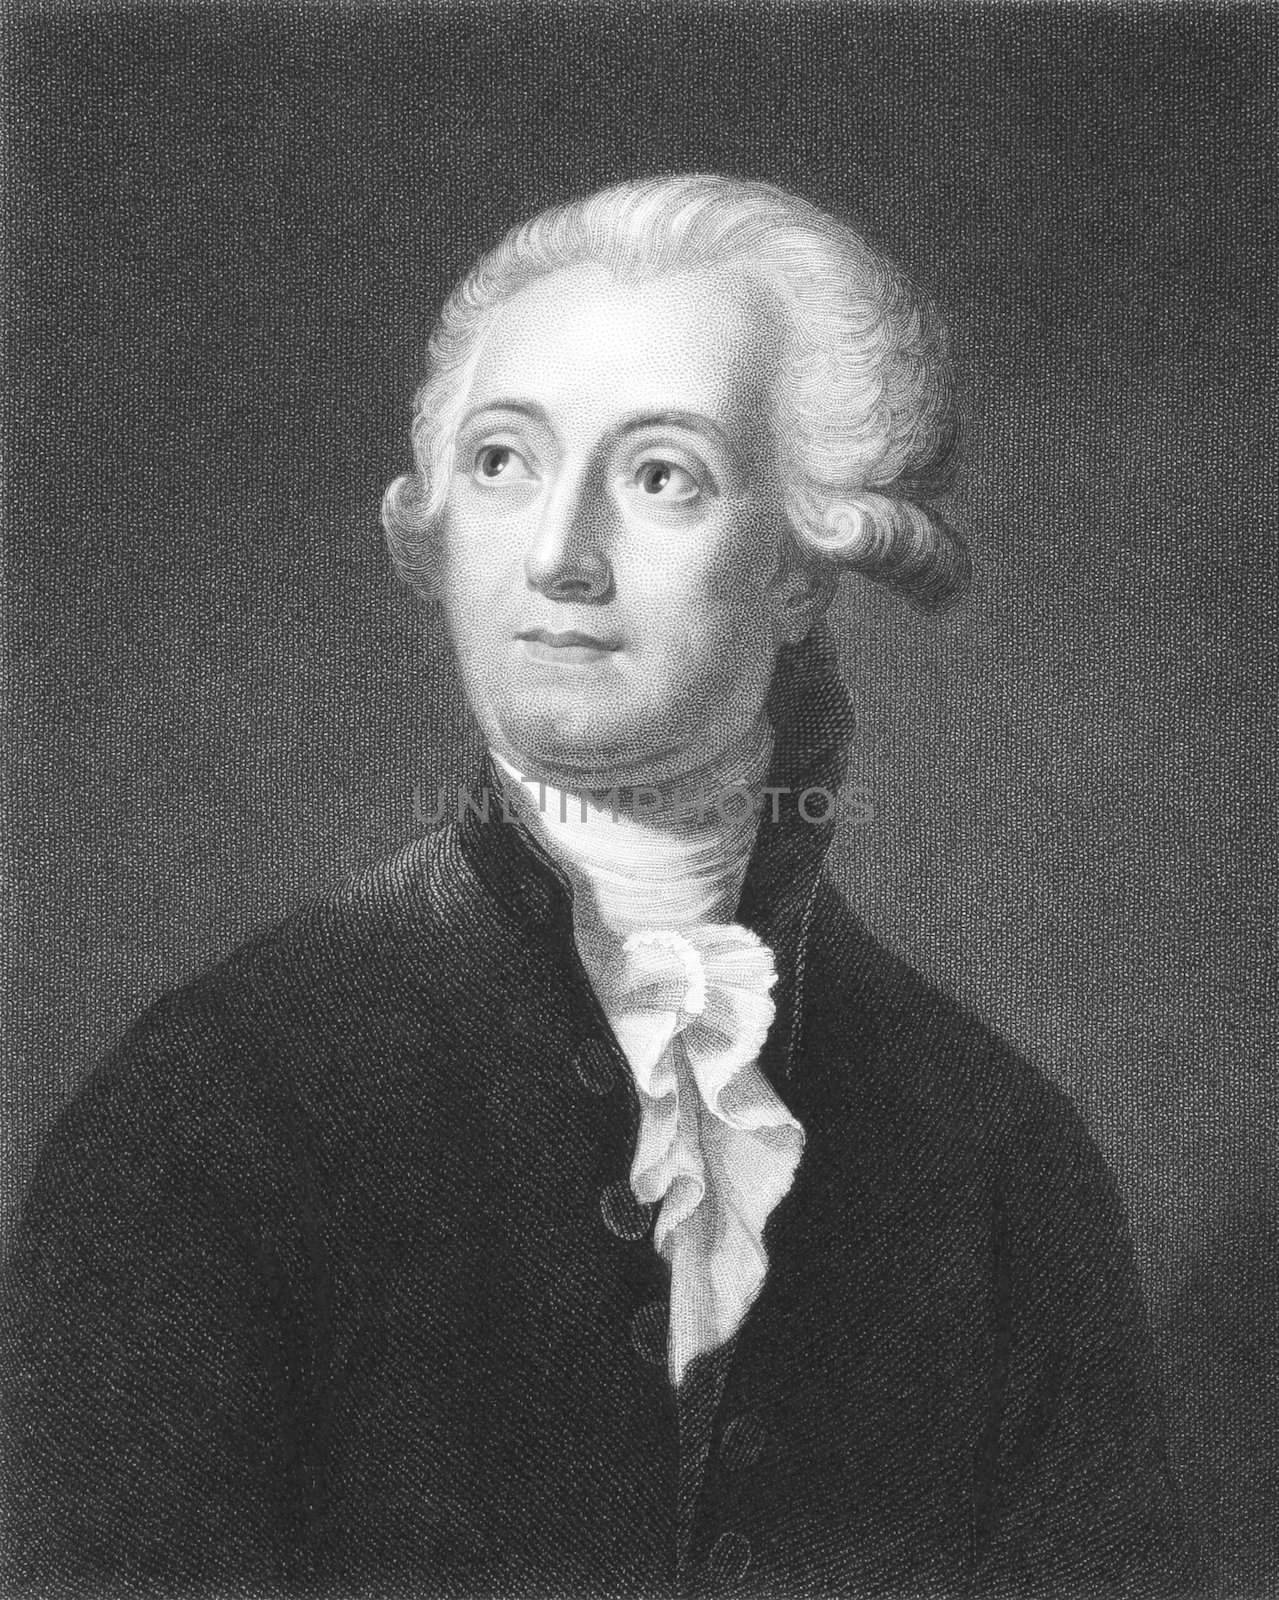 Antoine Lavoisier (1743-1794) on engraving from the 1800s. The father of modern chemistry. Engraved by C.E.Wagstaff from a picture by David and published in London by Charles Knight, Ludgate Street.